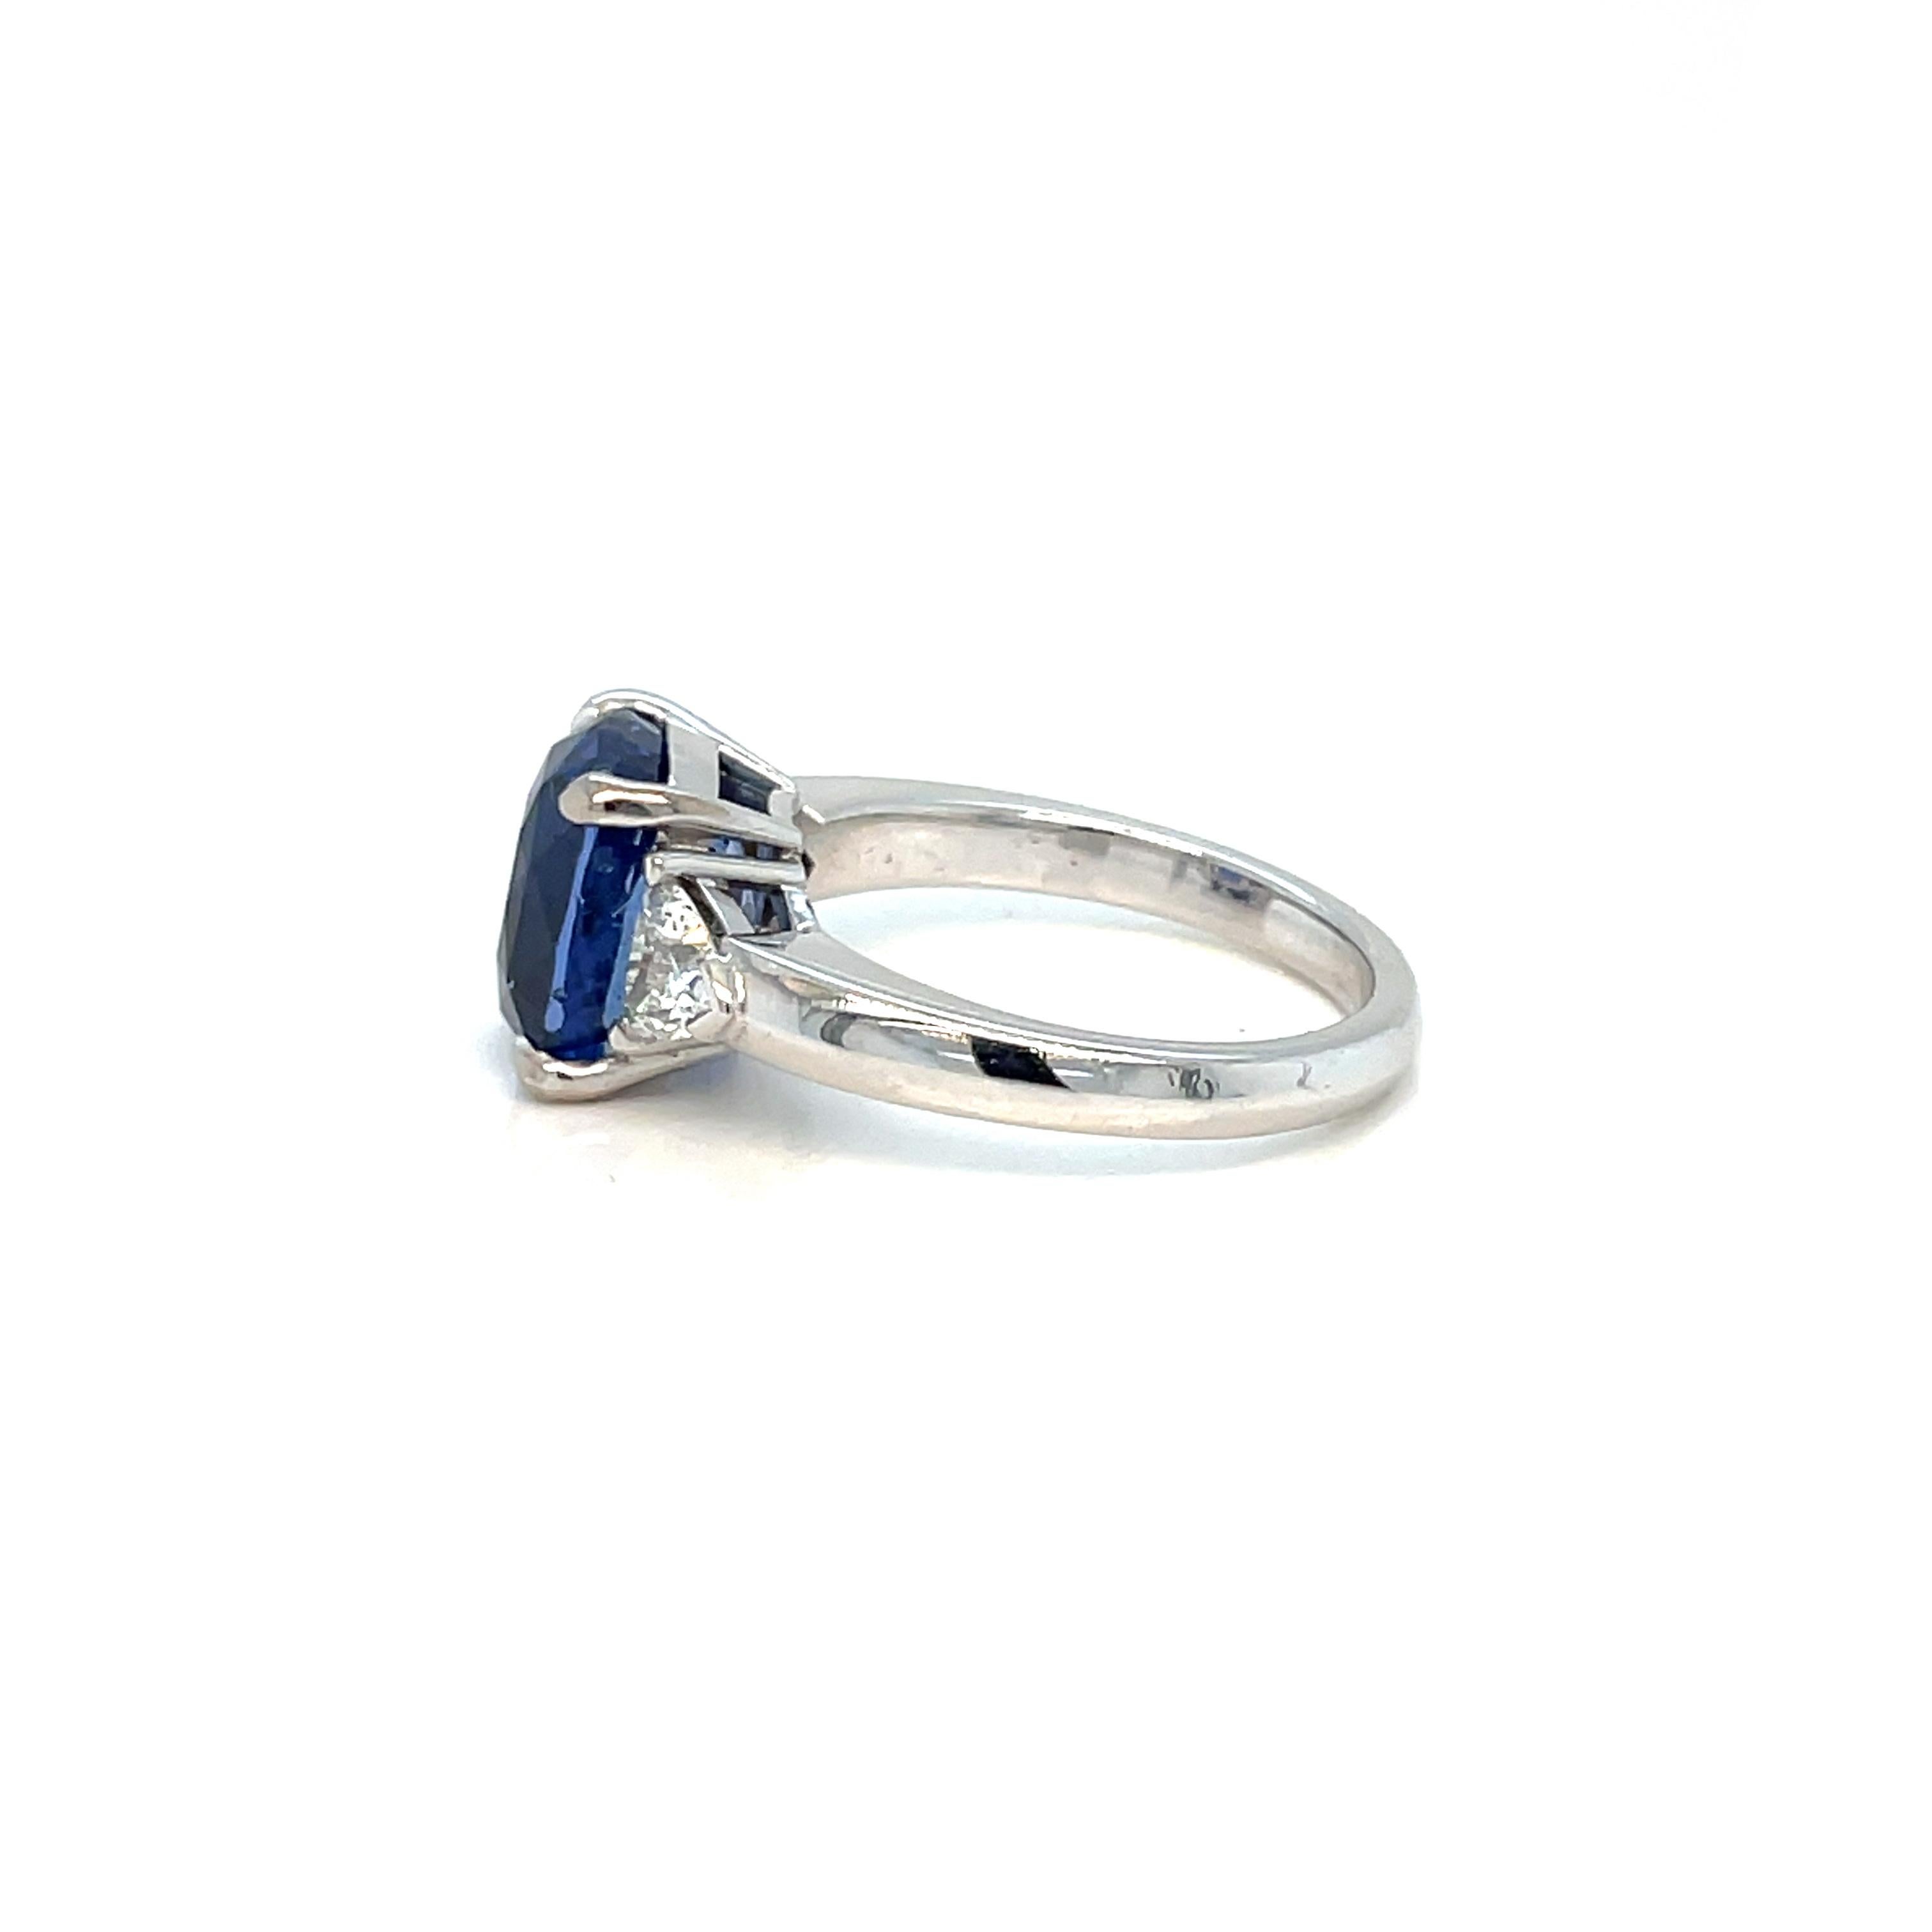 An exquisite ring set in 18k white gold, contemporary, featuring a vivid blu 6,0 ct cushion cut Ceylon Unheated Sapphire, surrounded by 2 Diamonds triangle cut, 0,40 ct each for a total weight of 0,80, graded G/H color Vvs1.
The Emerald is graded